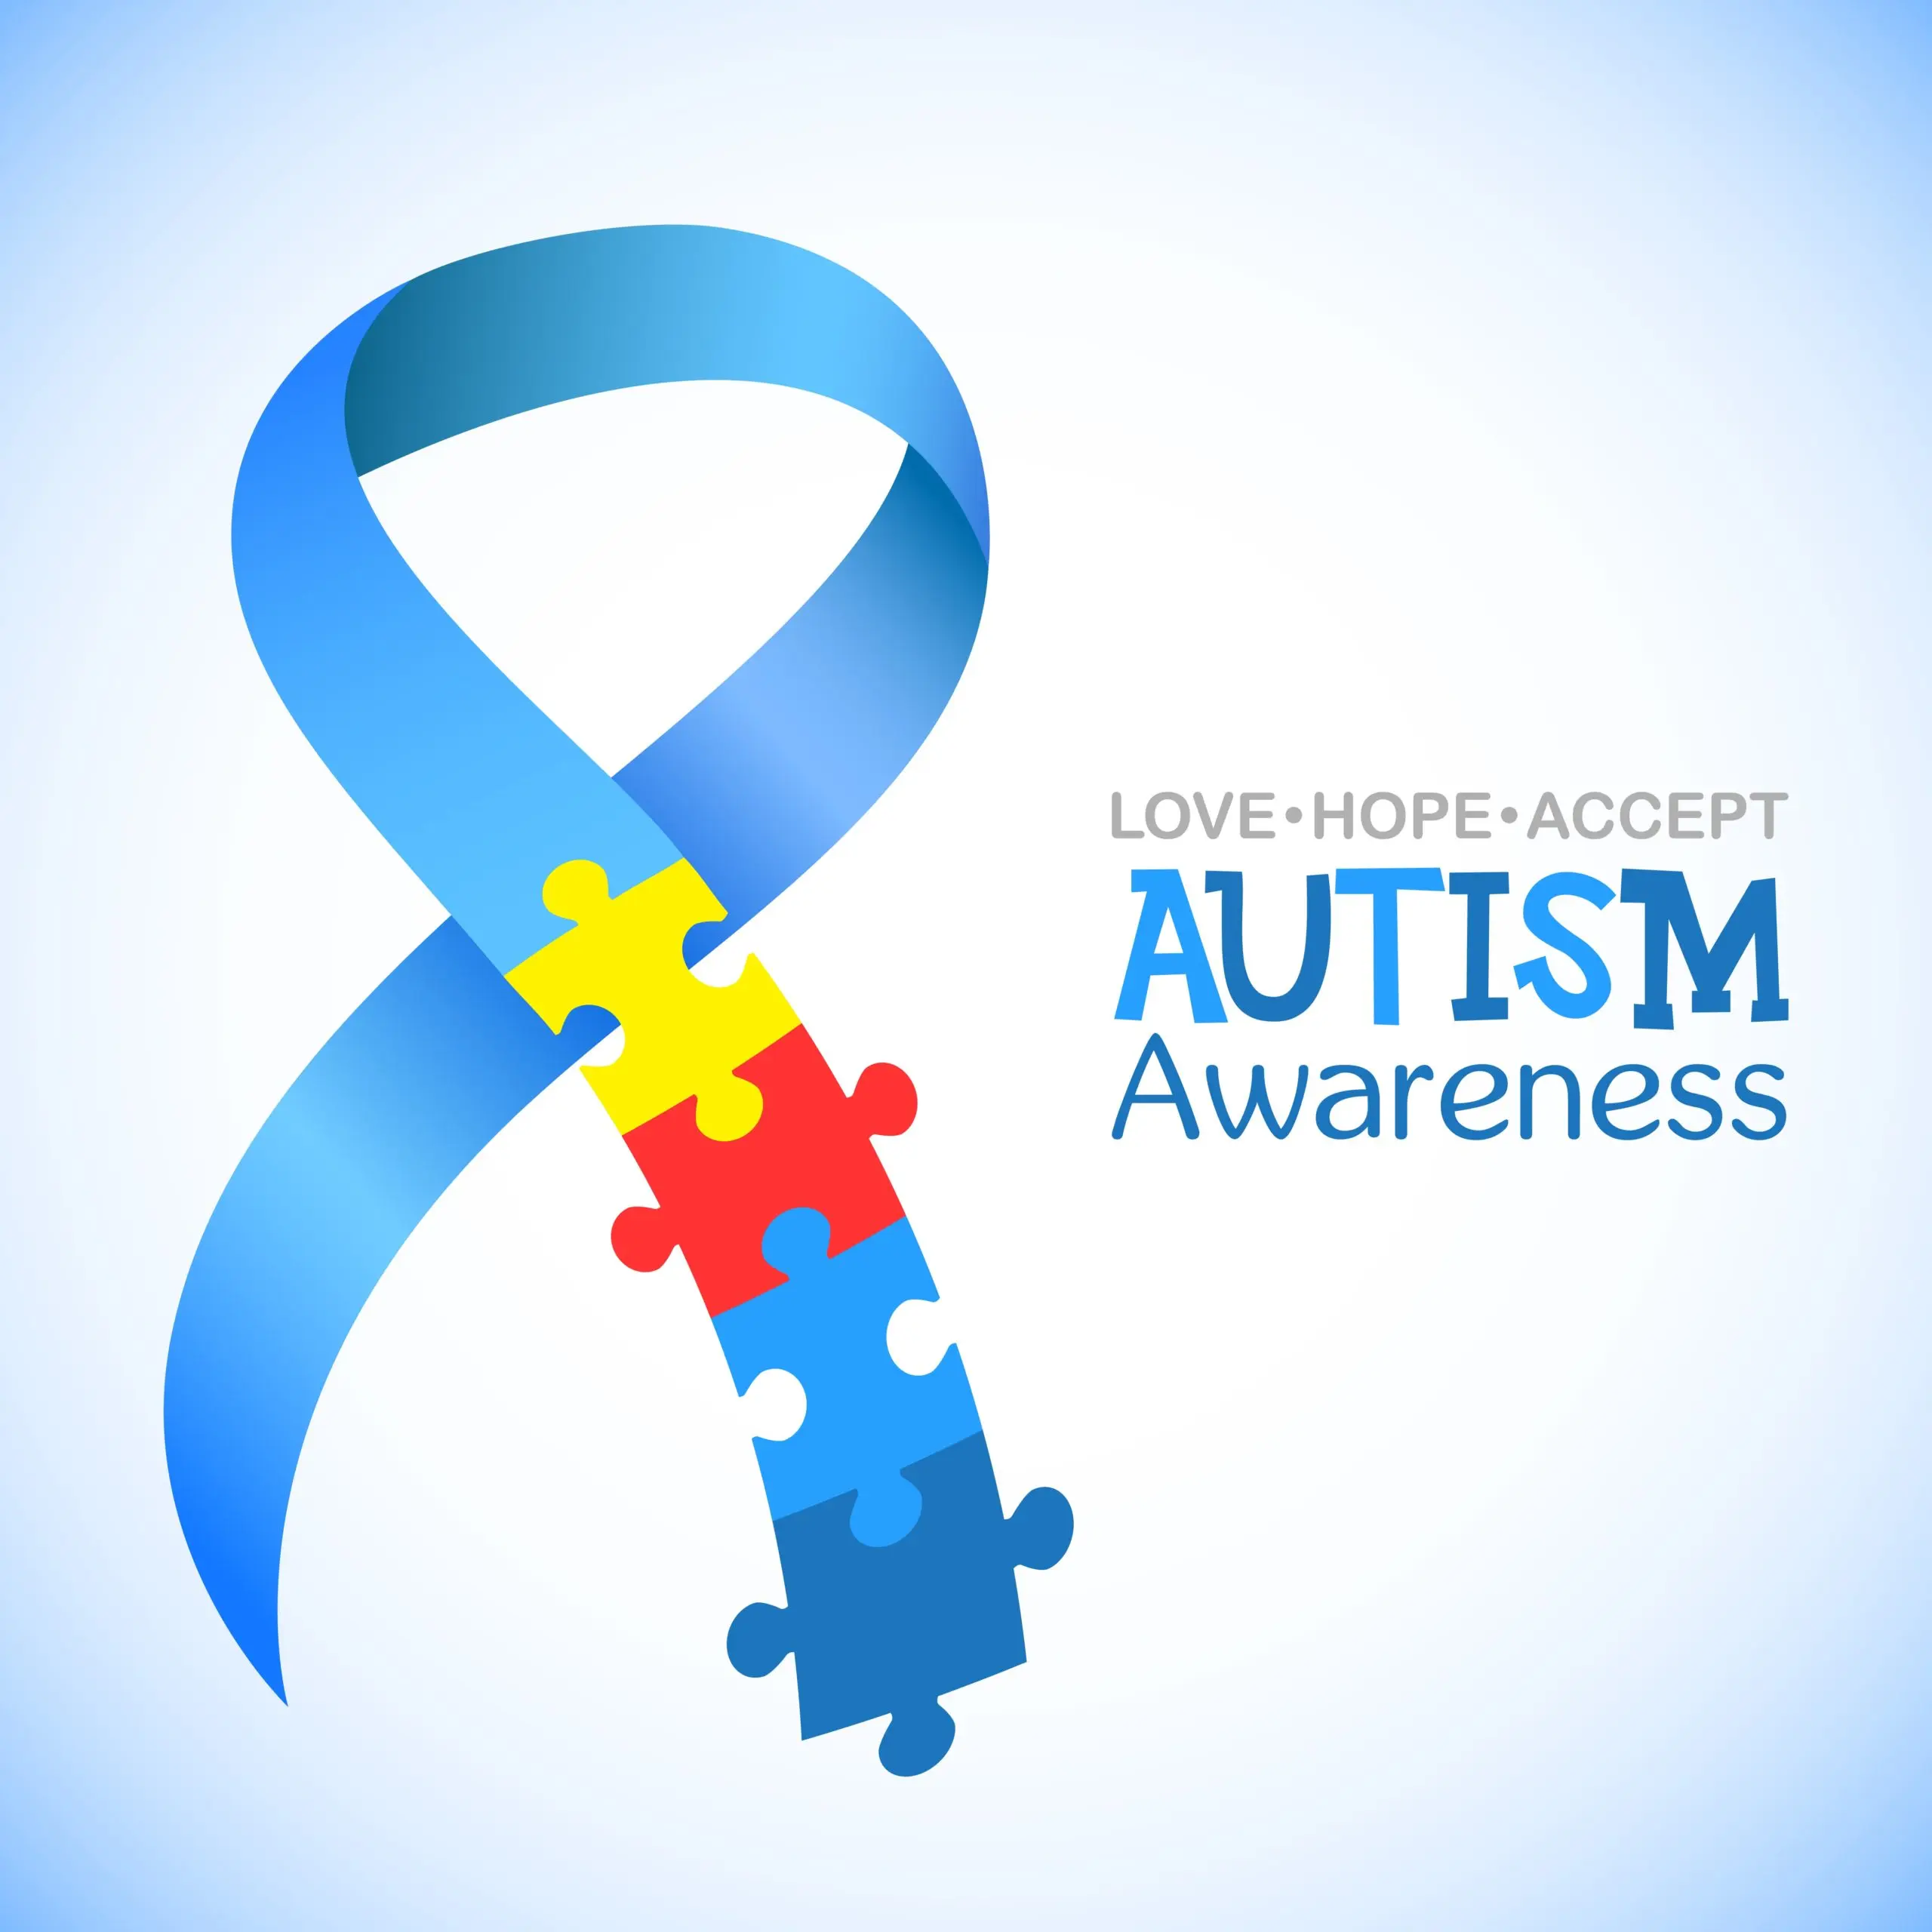 What history month is april? The National Autism Awareness Month